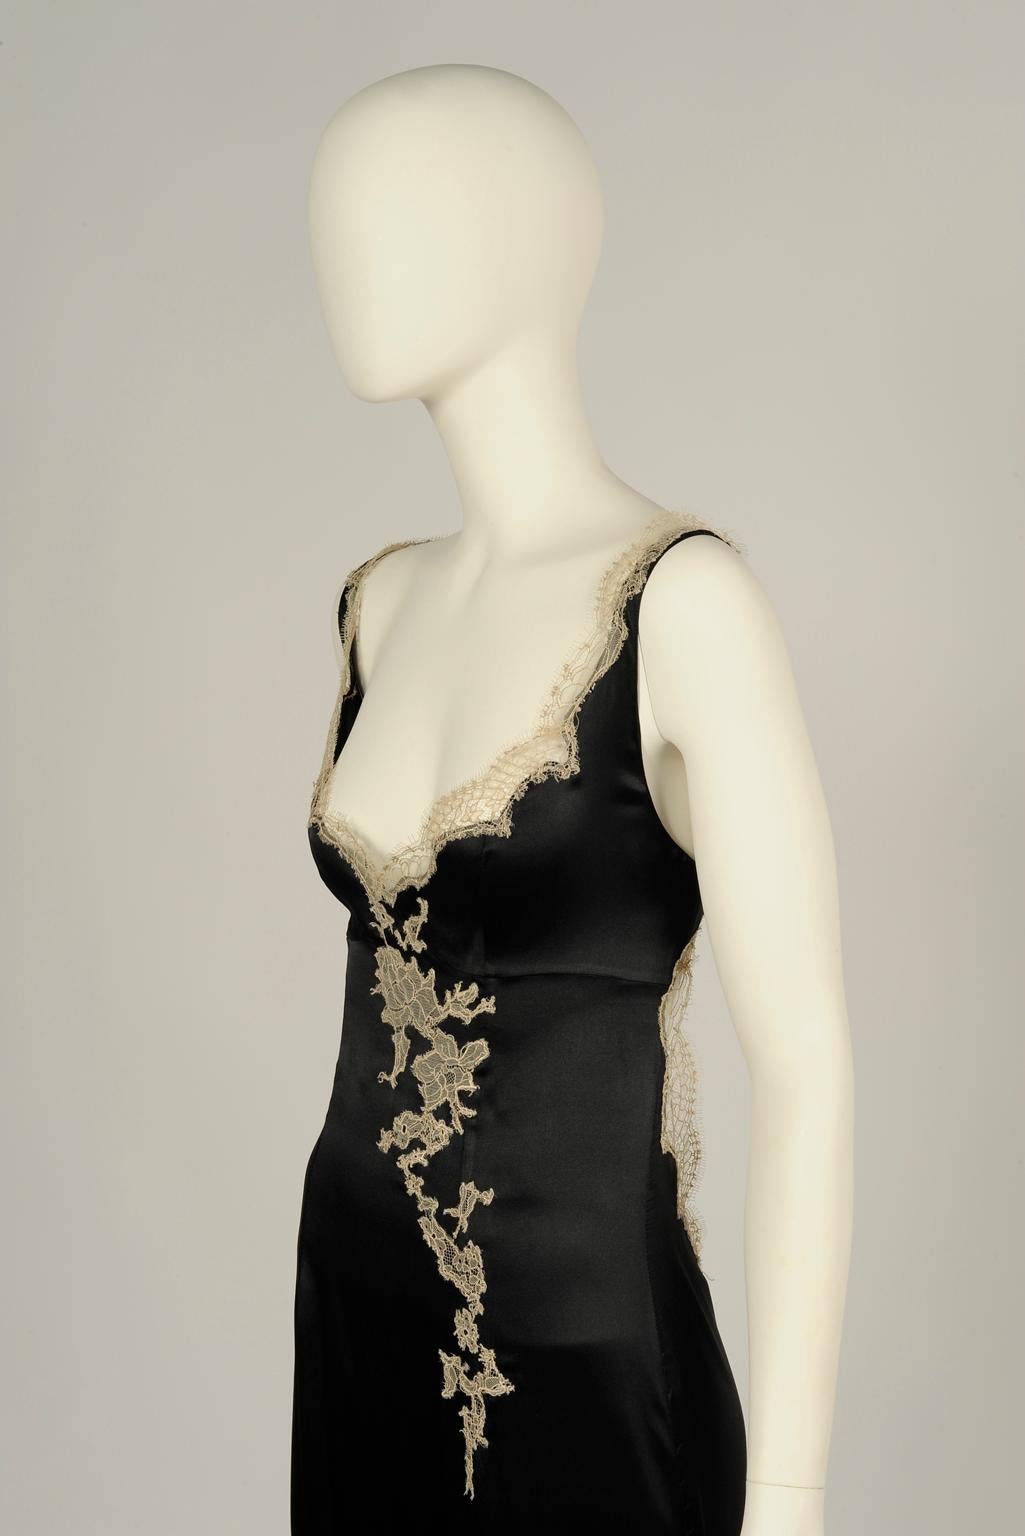 Lolita Lempicka Runway Lace-Trimmed Open-Back Slip Dress Gown:: automne-hiver 1998 10